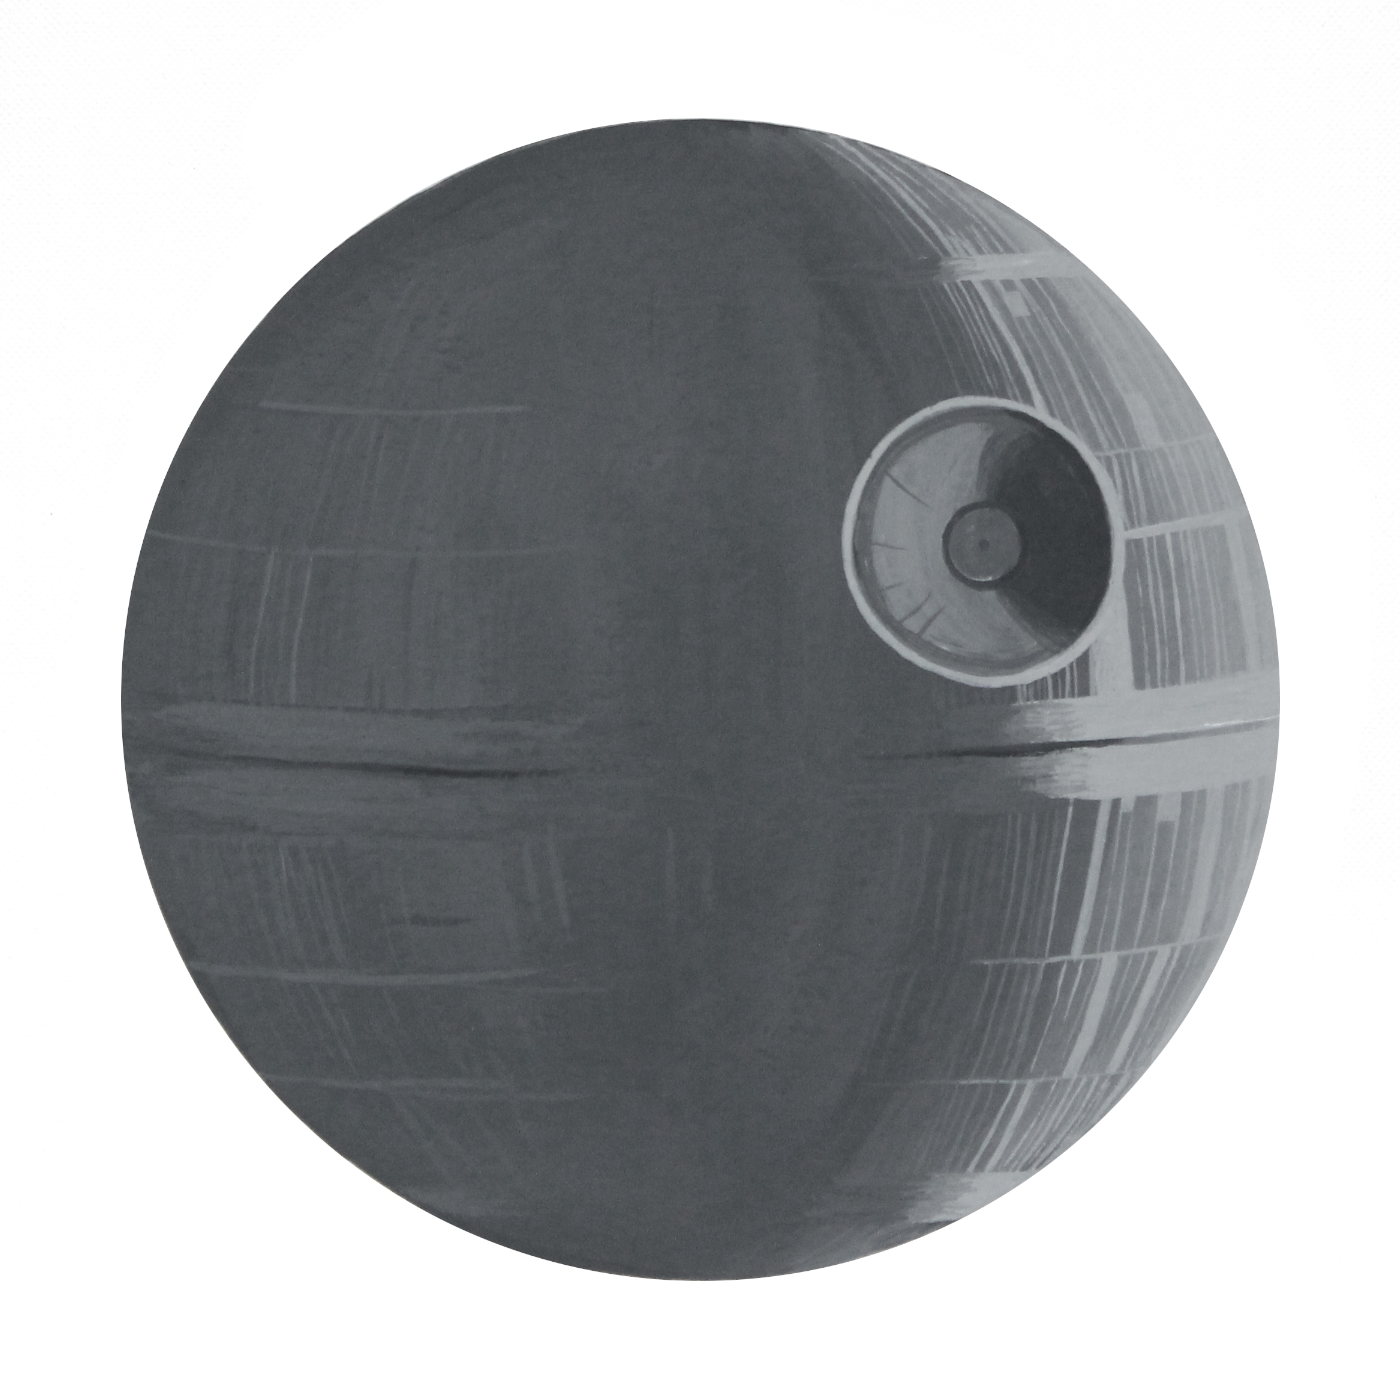 "That's No Moon" Hand Painted Death Star